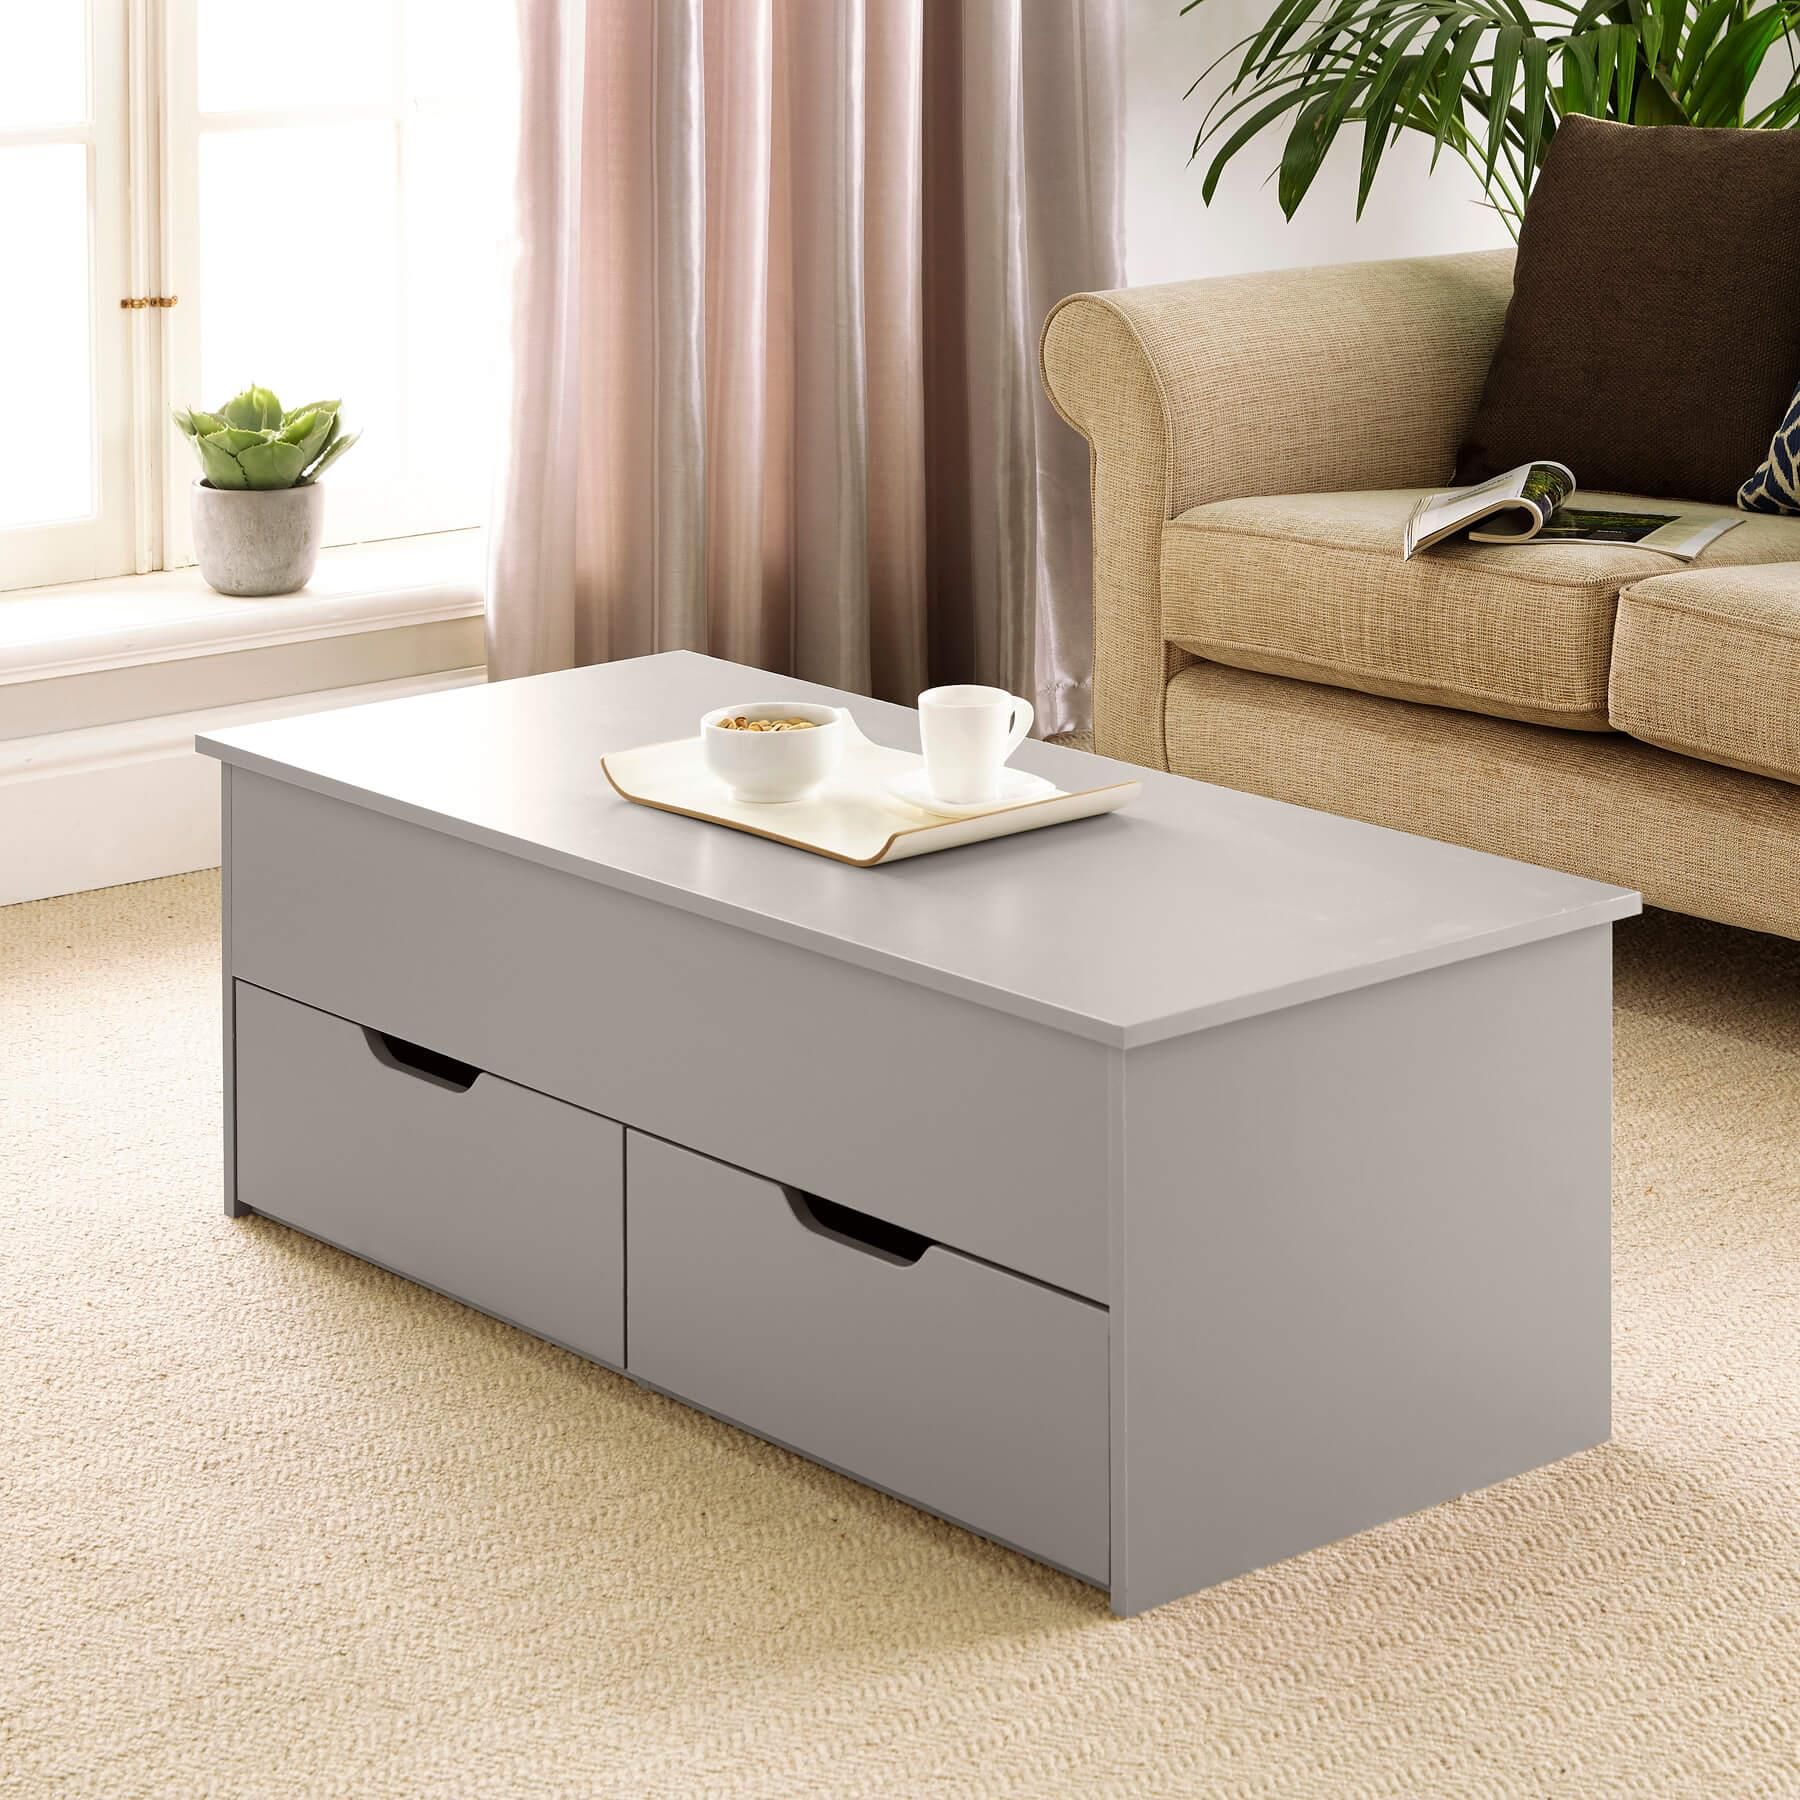 Grey Wooden Coffee Table With Lift Up Top And 2 Large Storage Drawers Regarding Lift Top Coffee Tables With Storage Drawers (View 10 of 15)